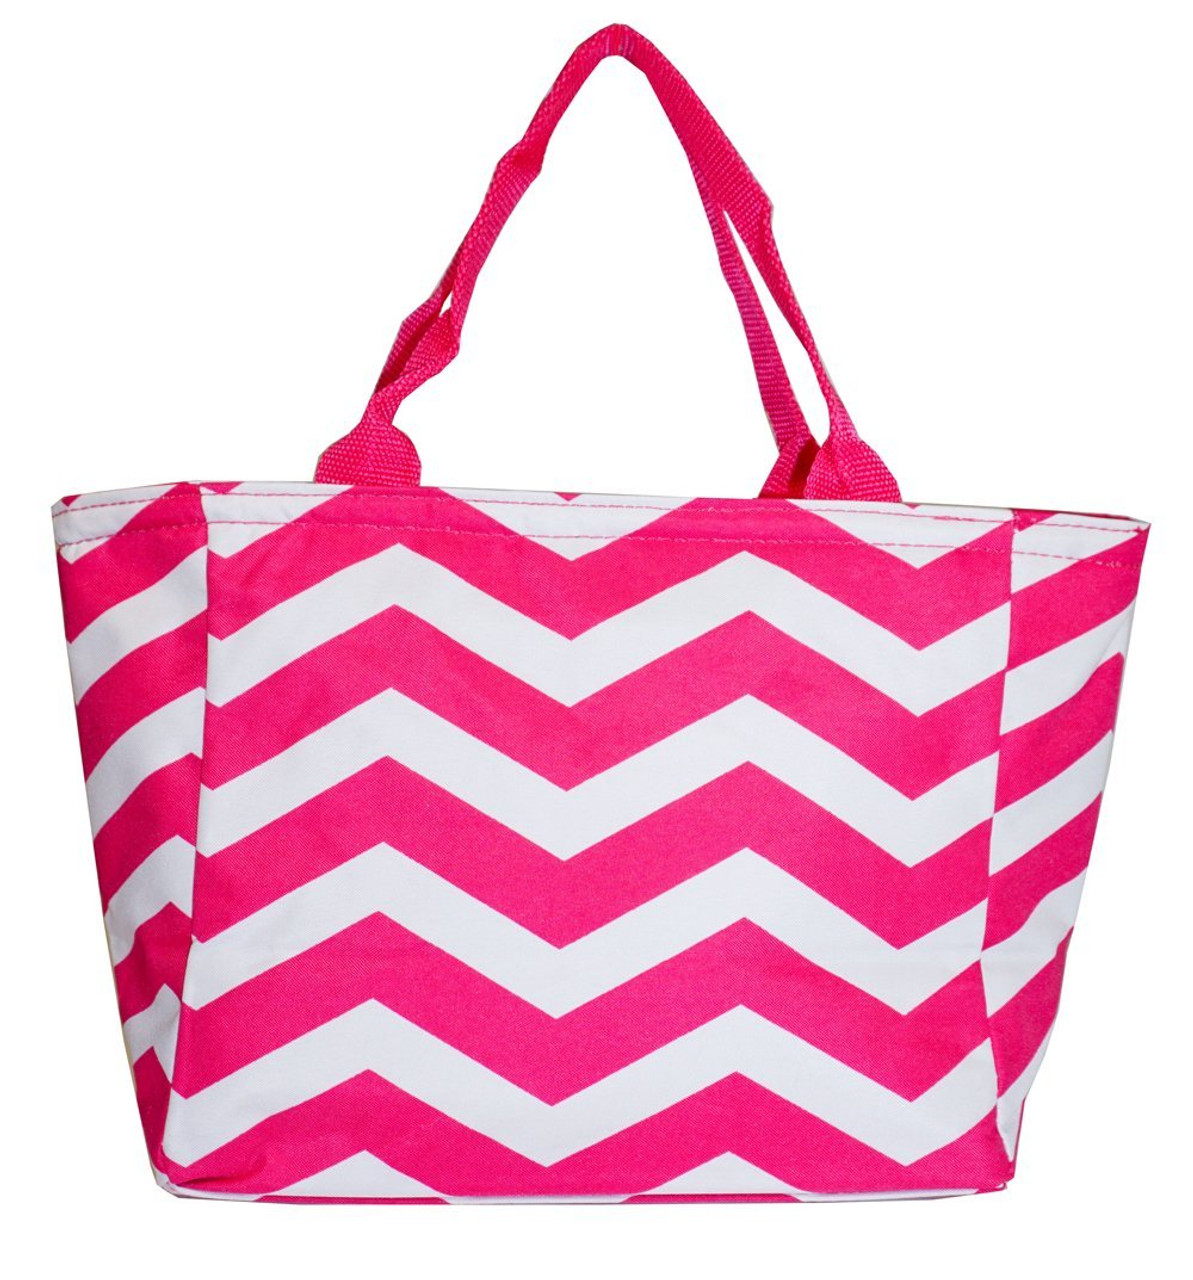 Chevron Large Canvas Large Tote Bag Luggage Carry On Striped Stripe Zig Zag Pink 